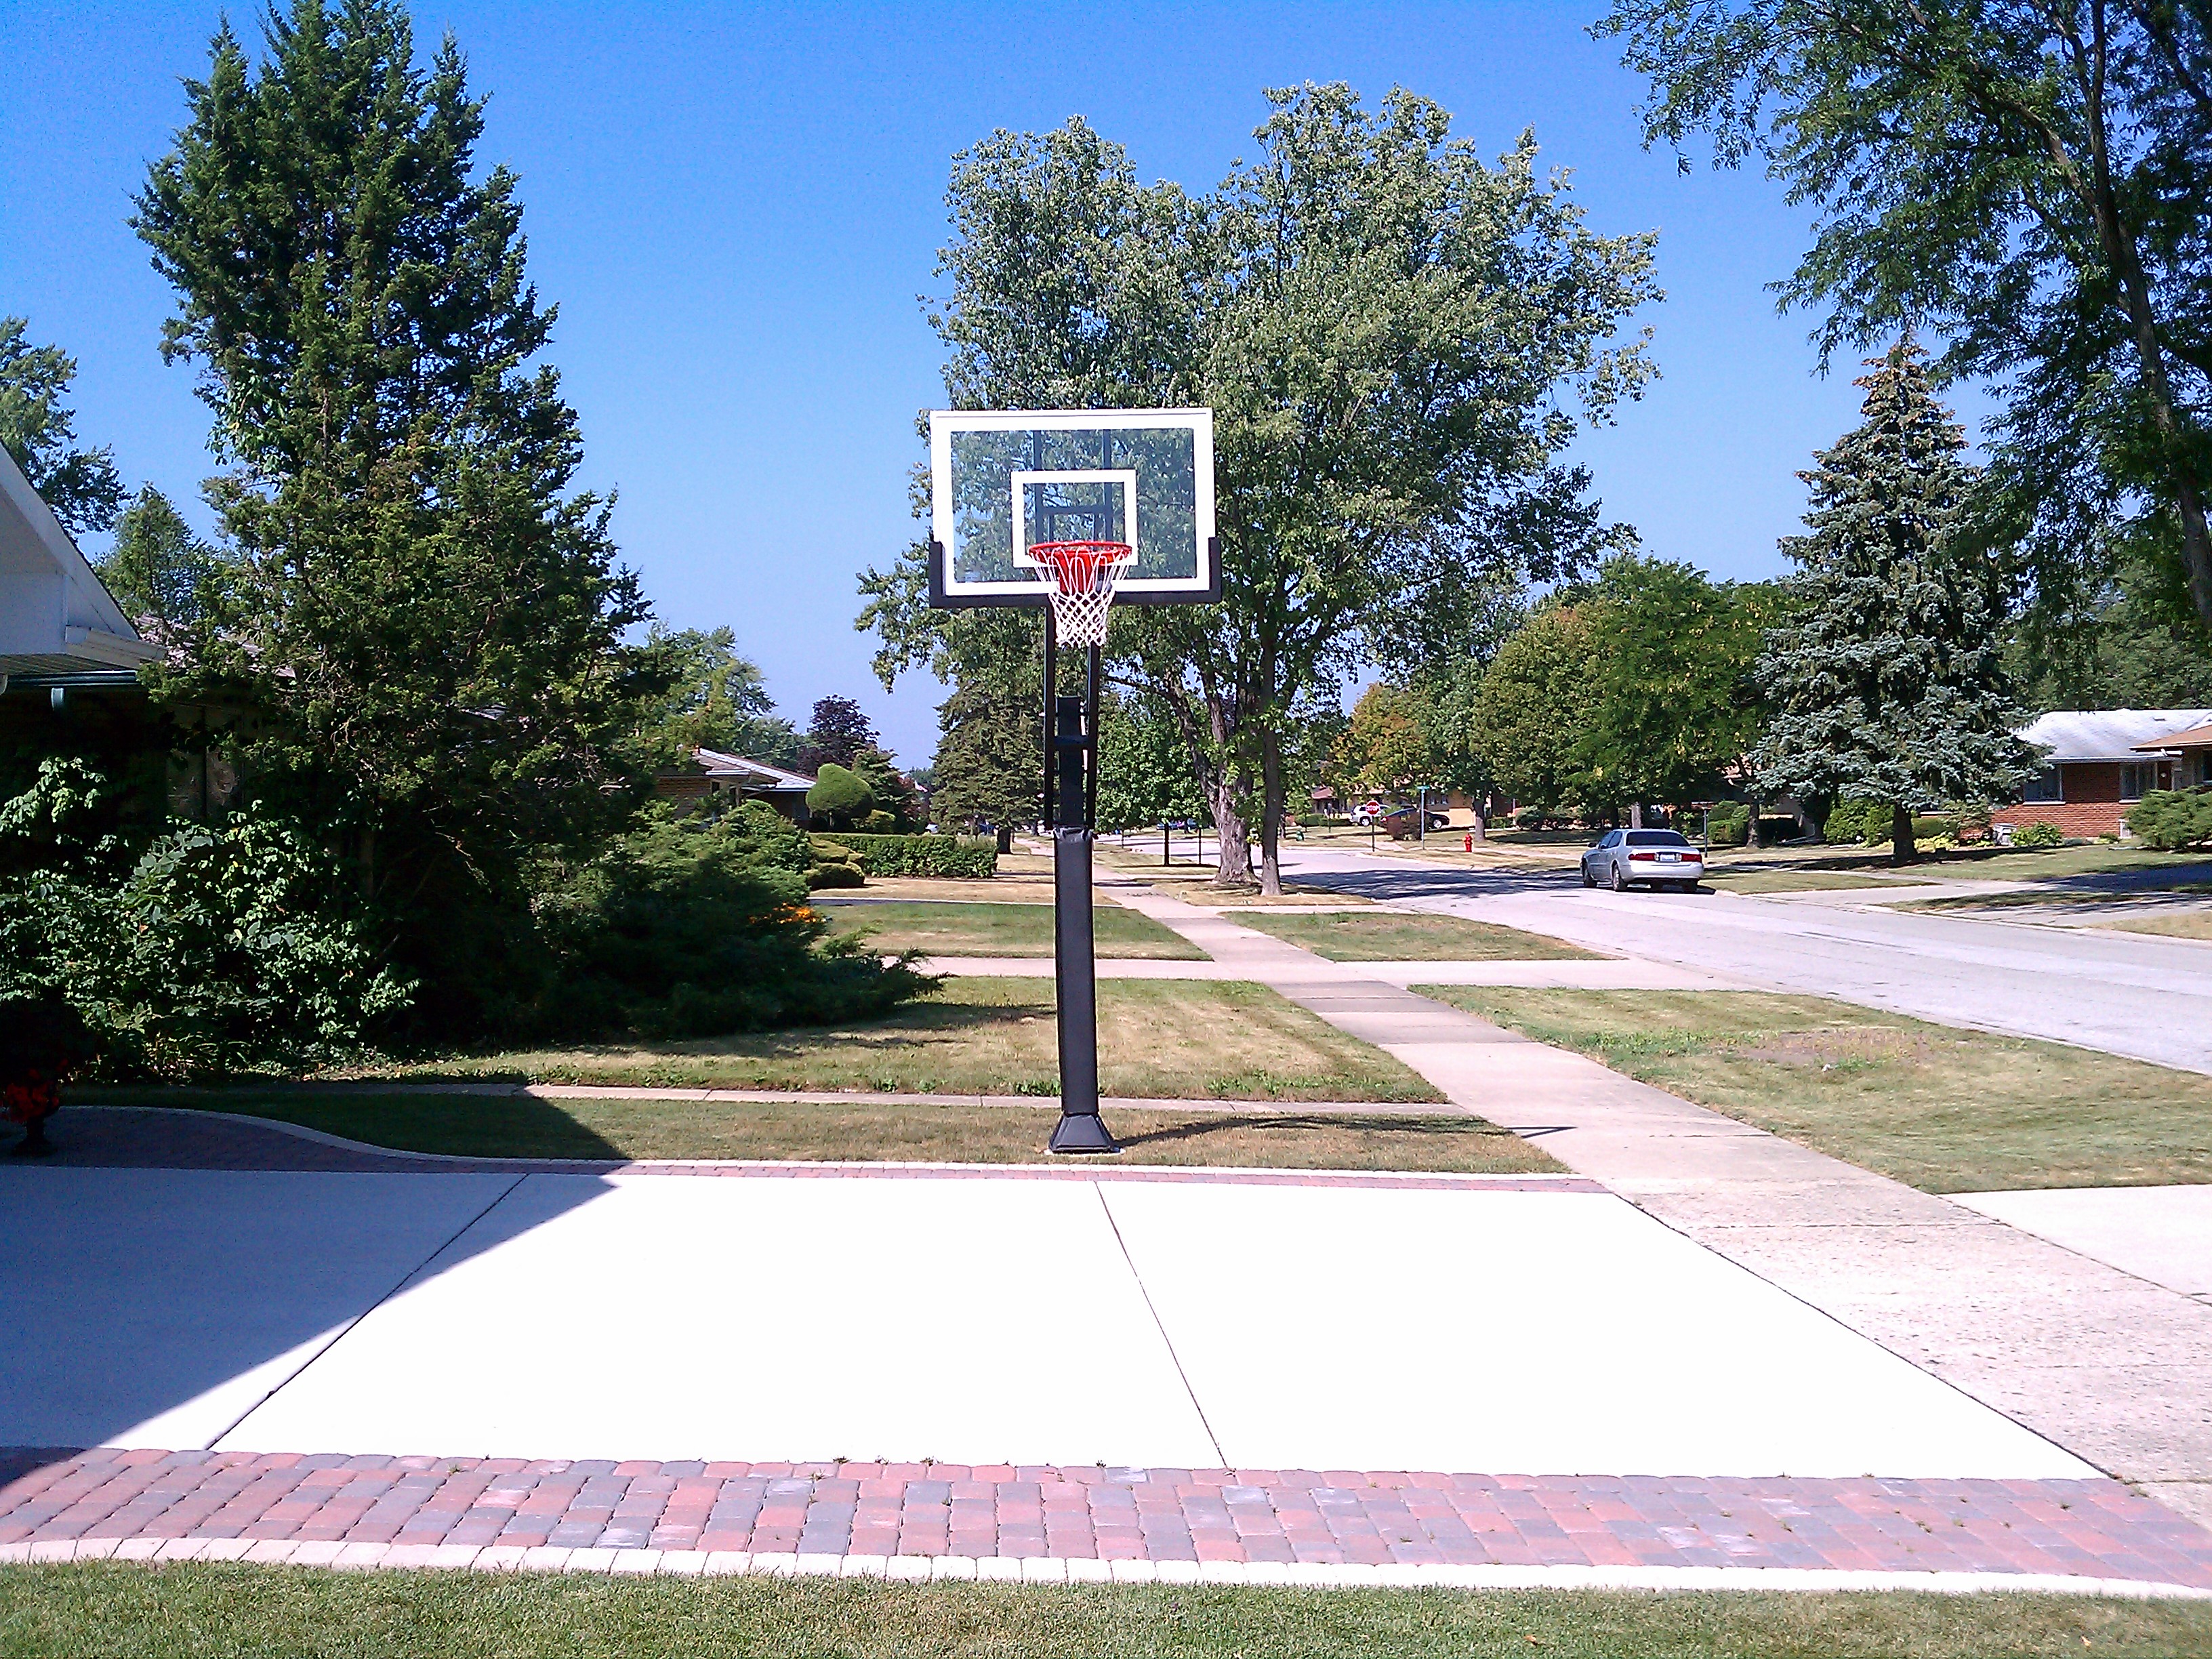 It is a beautiful day to shoot some baskets.